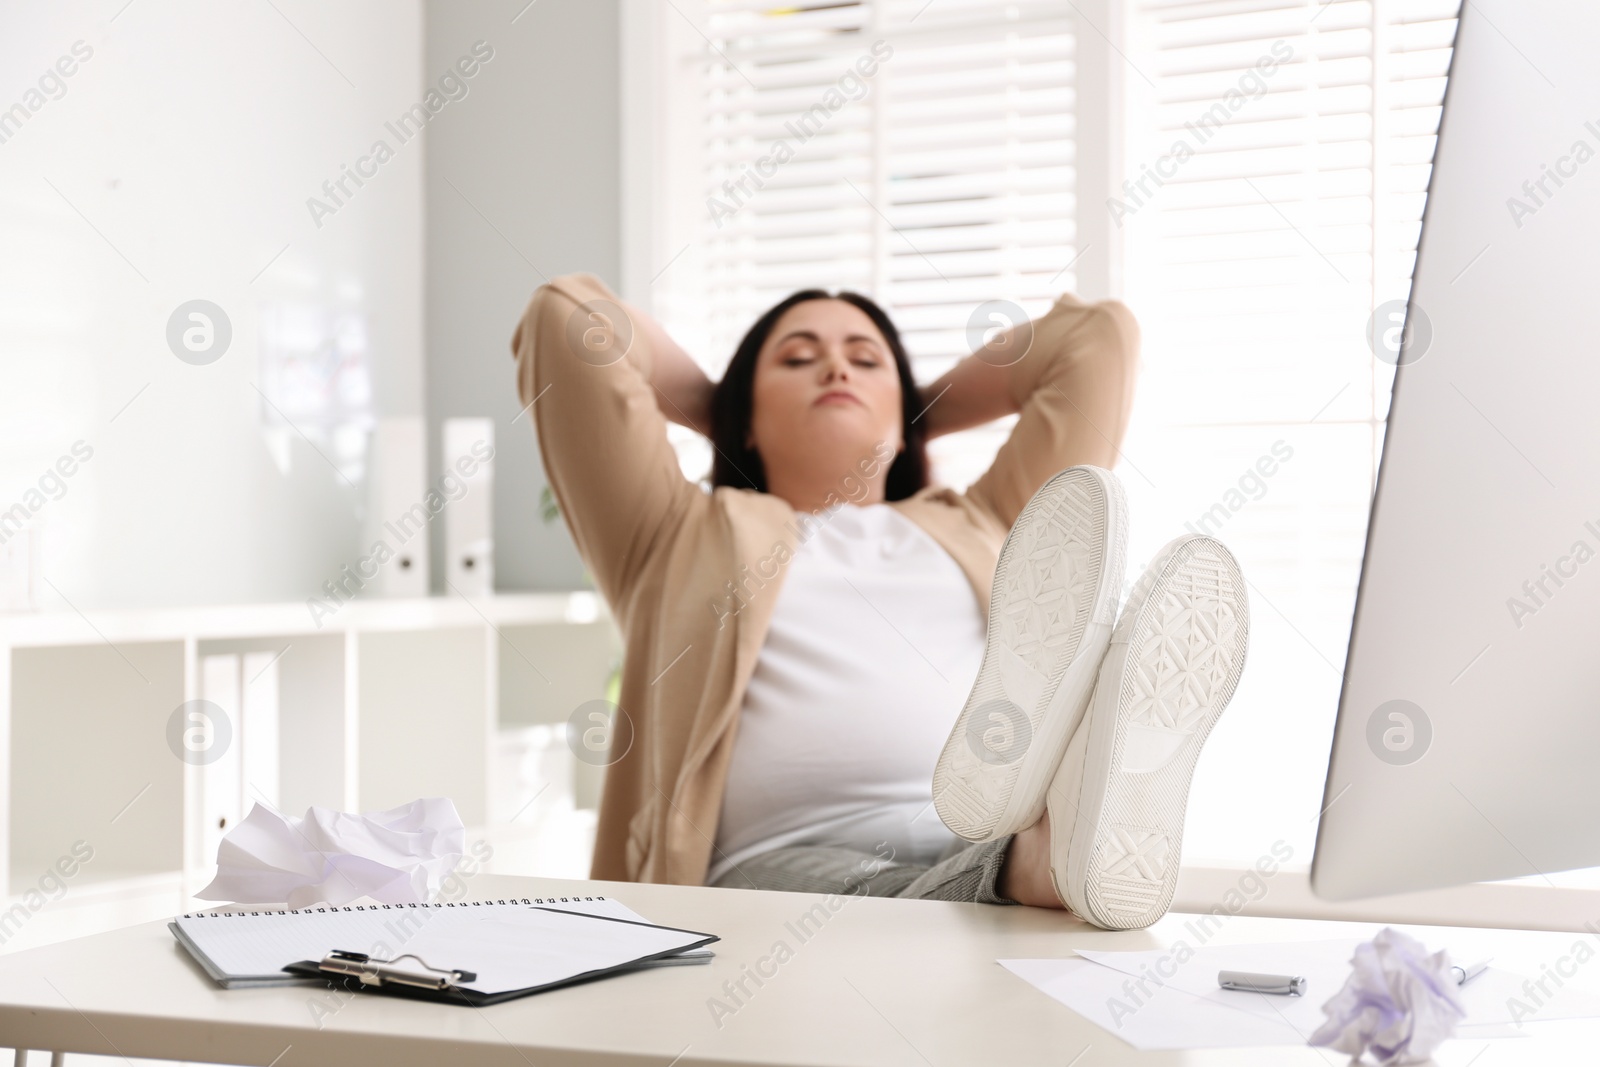 Photo of Lazy overweight worker with feet on desk in office